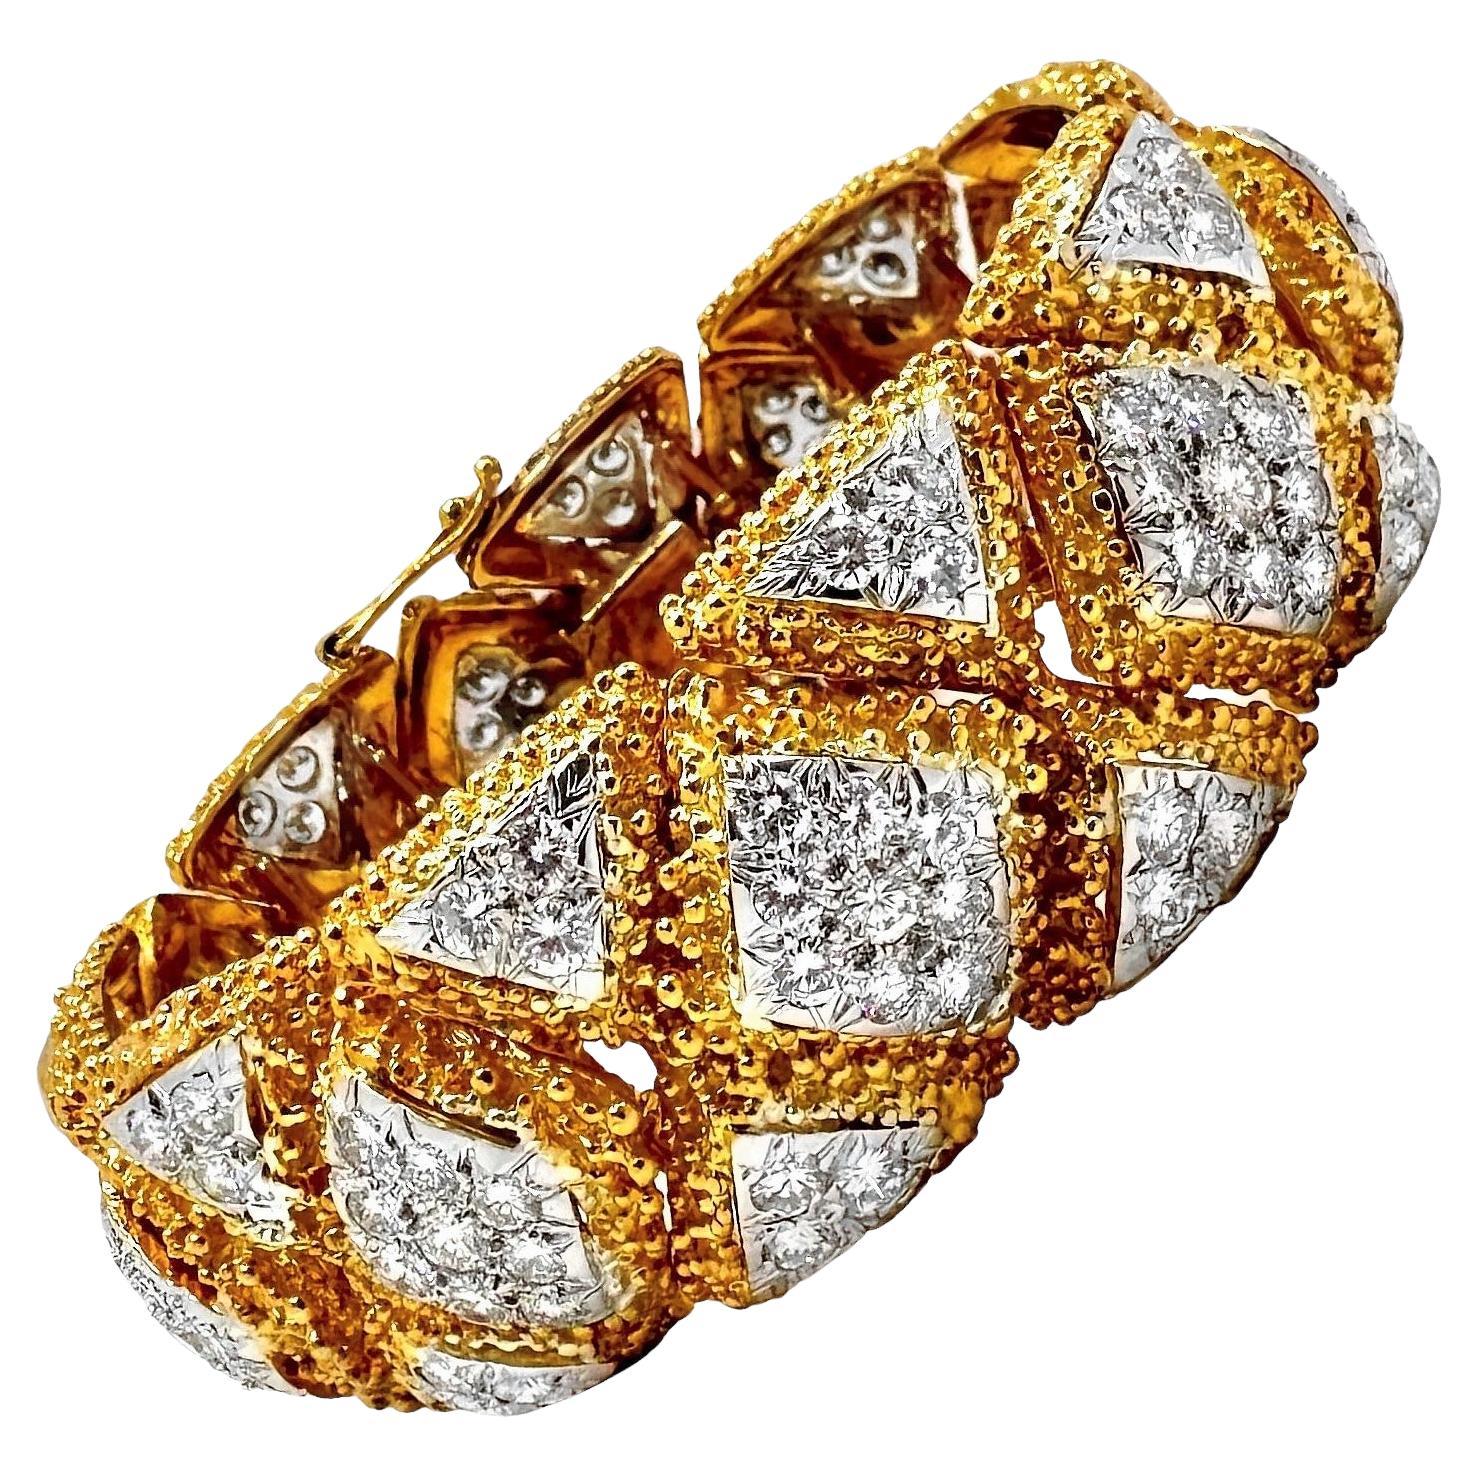 Luxurious American 1960s Bombe 18k Yellow Gold and Diamond Cocktail Bracelet